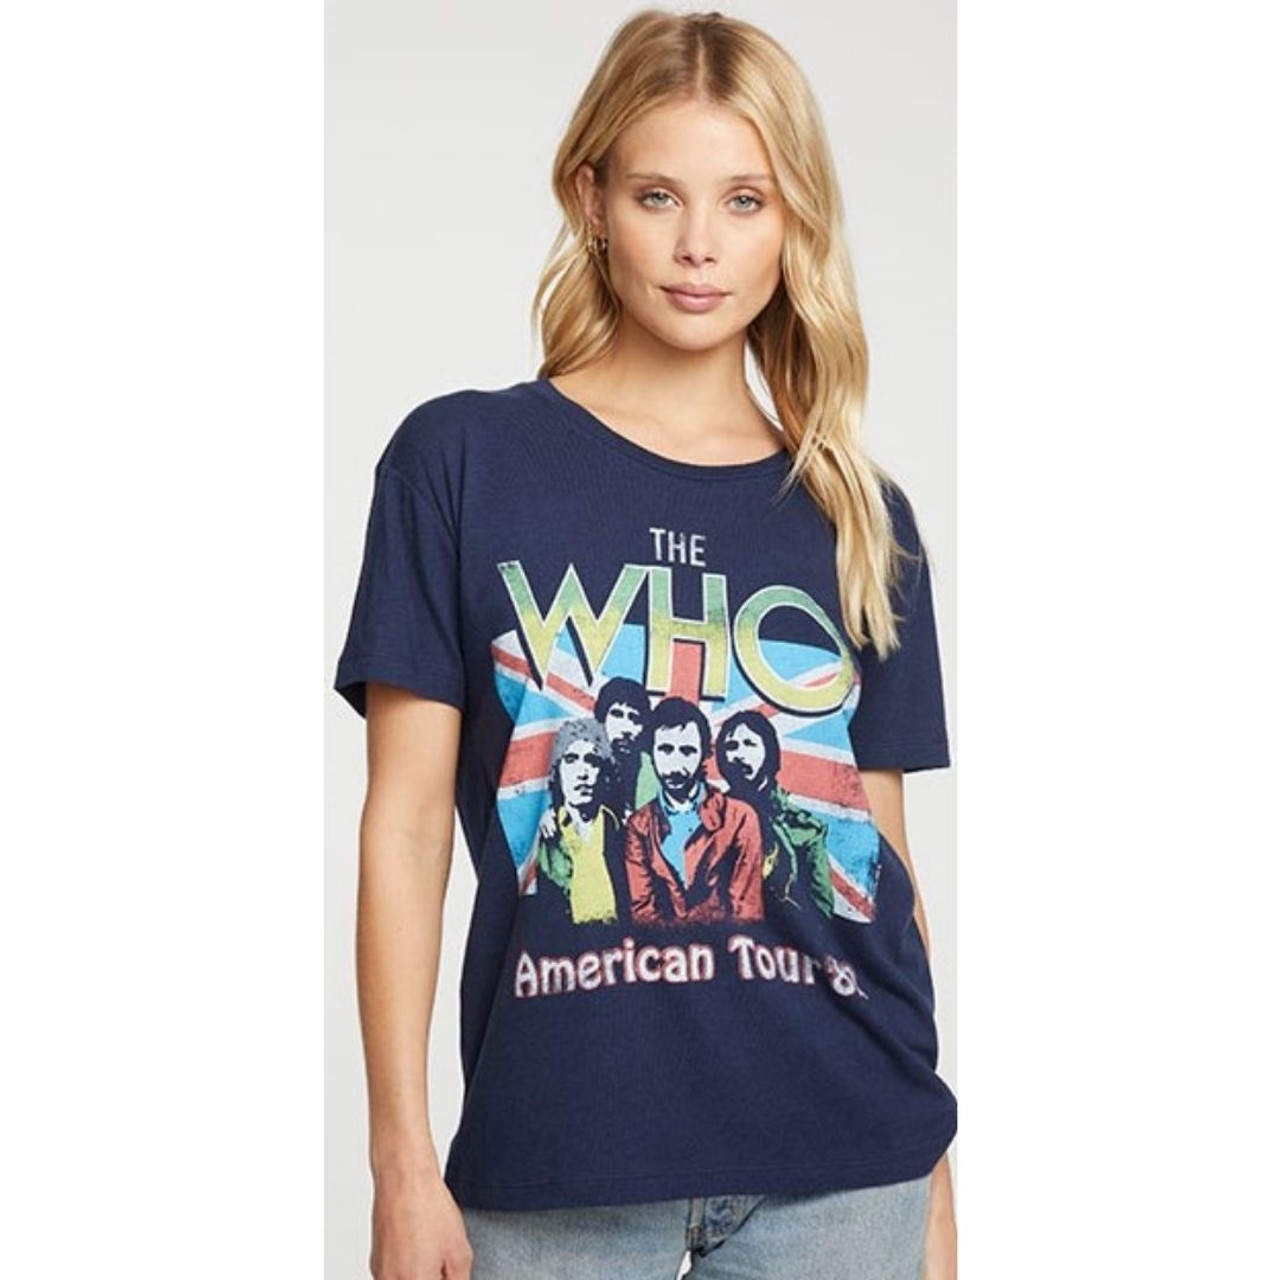 https://cdn11.bigcommerce.com/s-fbddb/images/stencil/1280x1280/products/1512/3644/the-who-classic-rock-roll-band-group-american-tour-1976-womens-vintage-blue-fashion-concert-t-shirt-chaser-front-1__96982.1639092393.jpg?c=2&imbypass=on